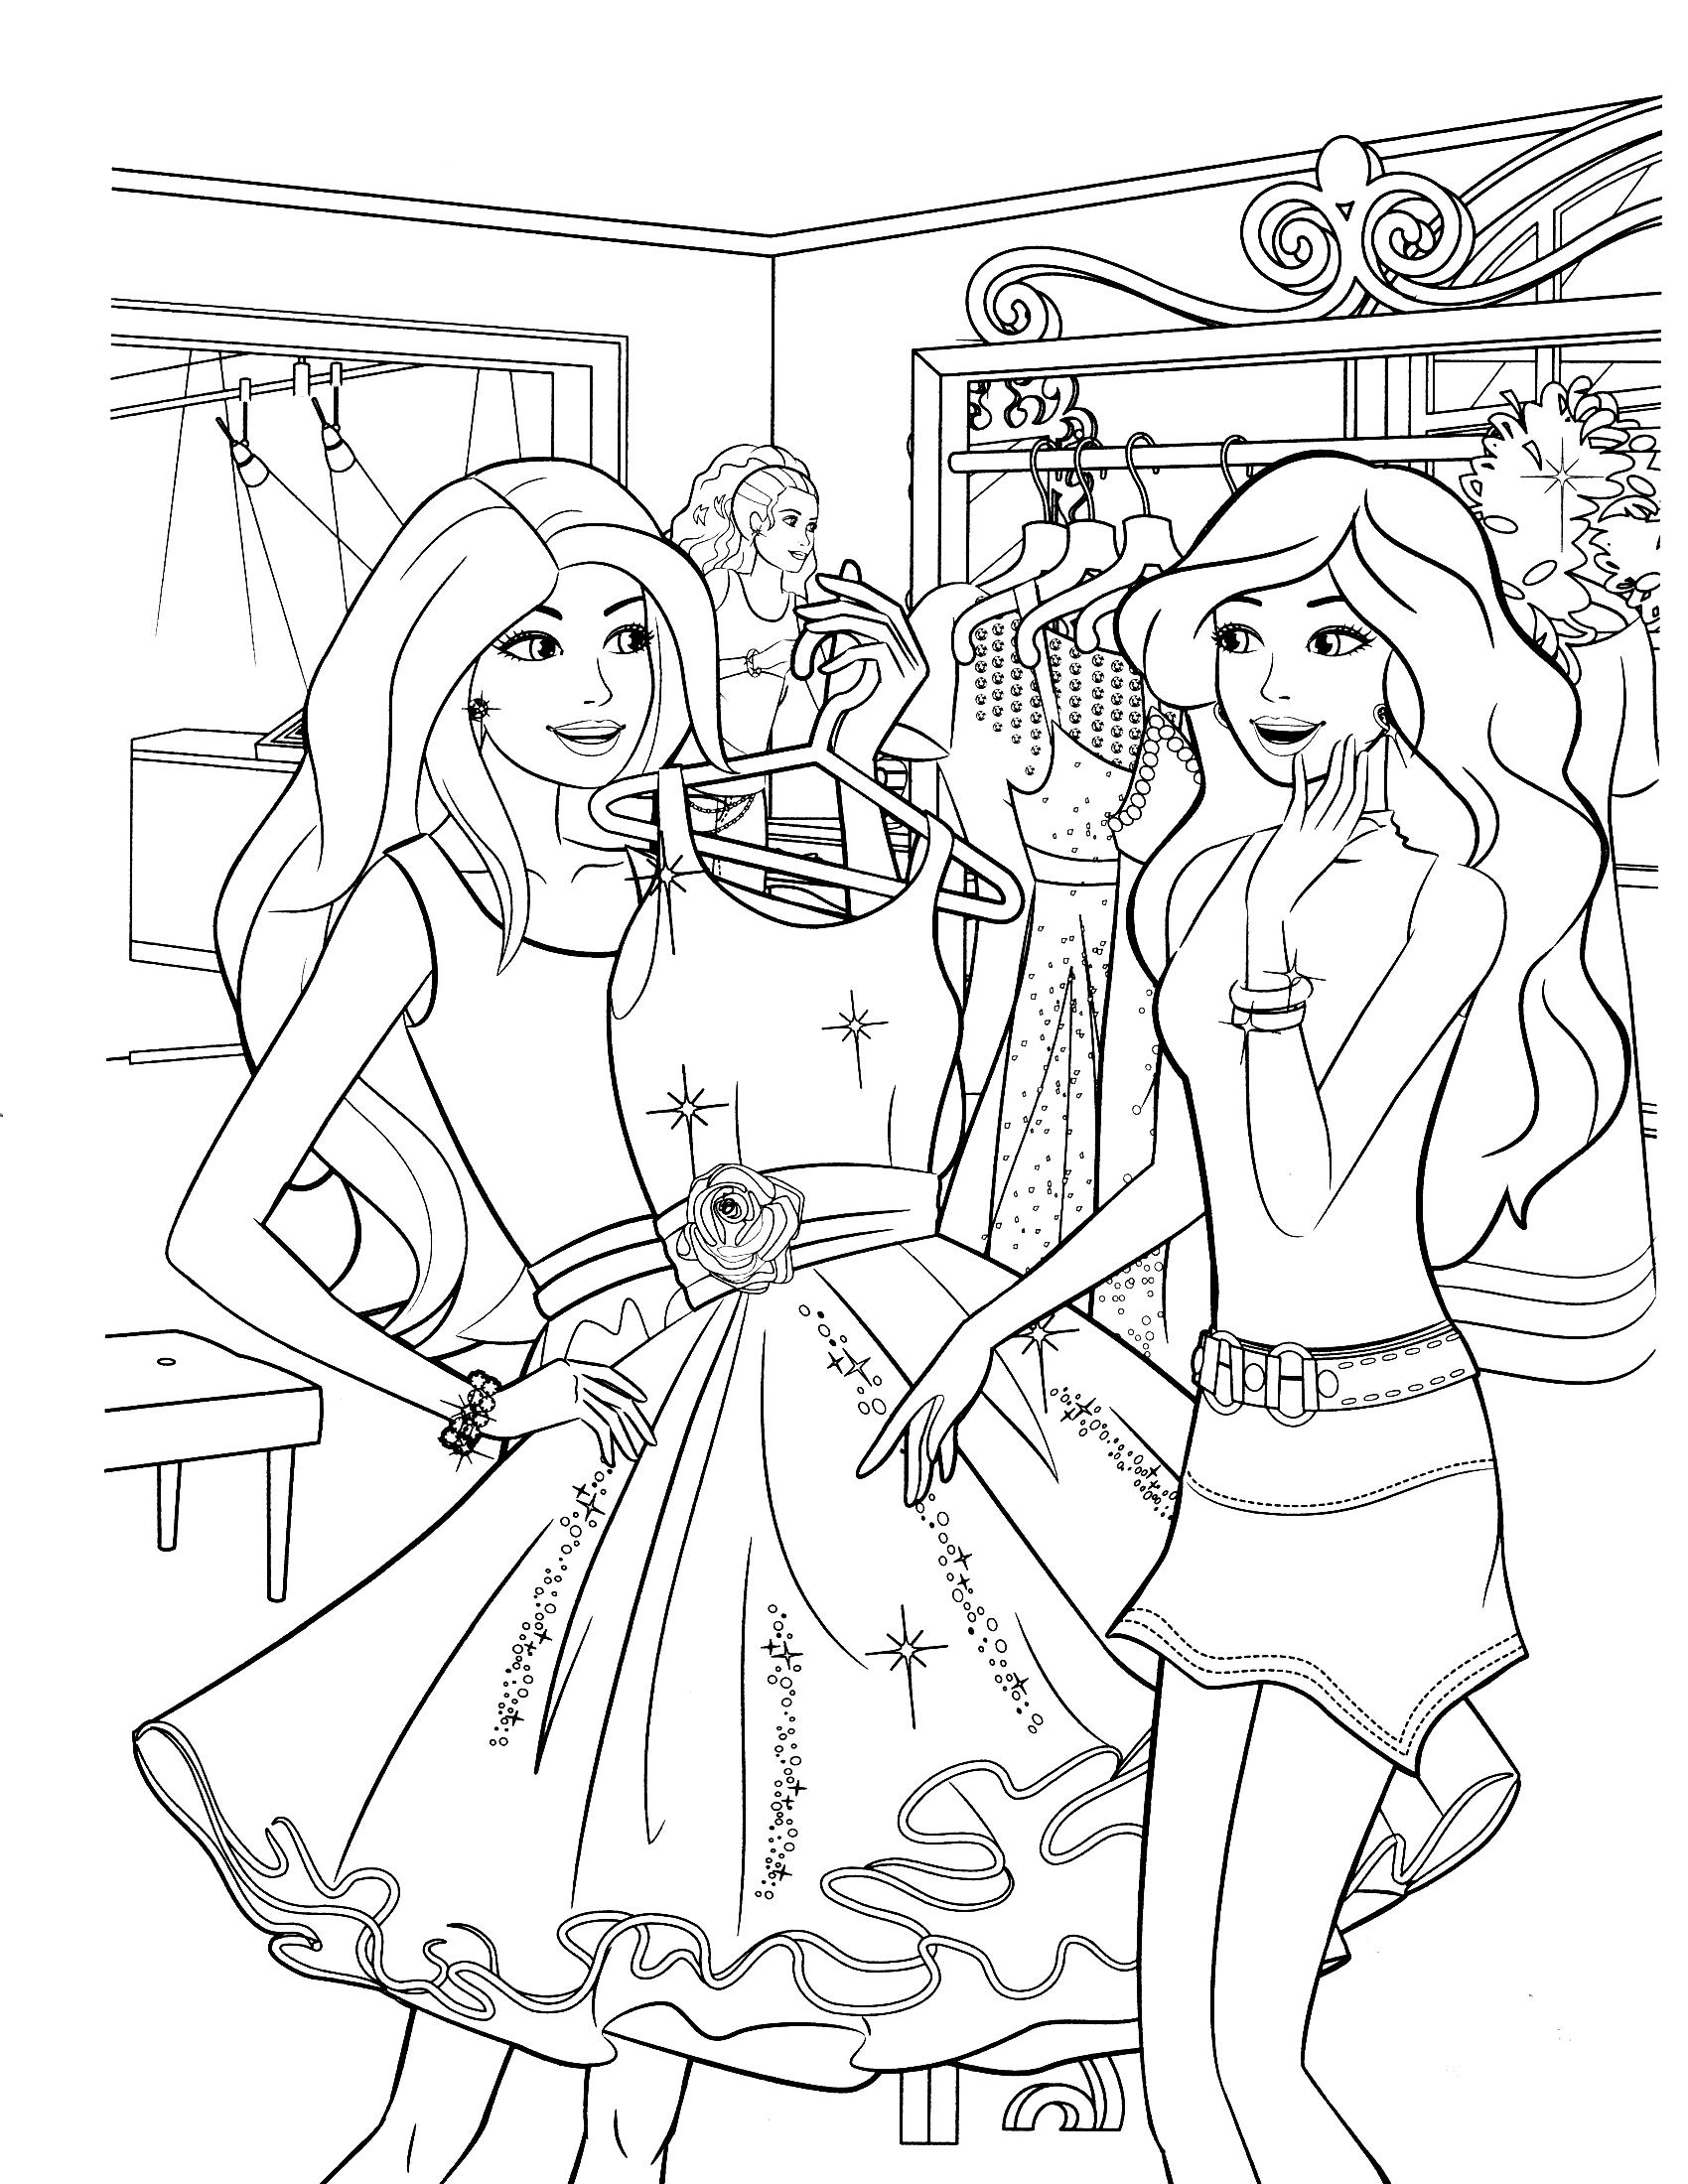 85-barbie-coloring-pages-for-girls-barbie-princess-friends-and-fantasy-print-color-craft